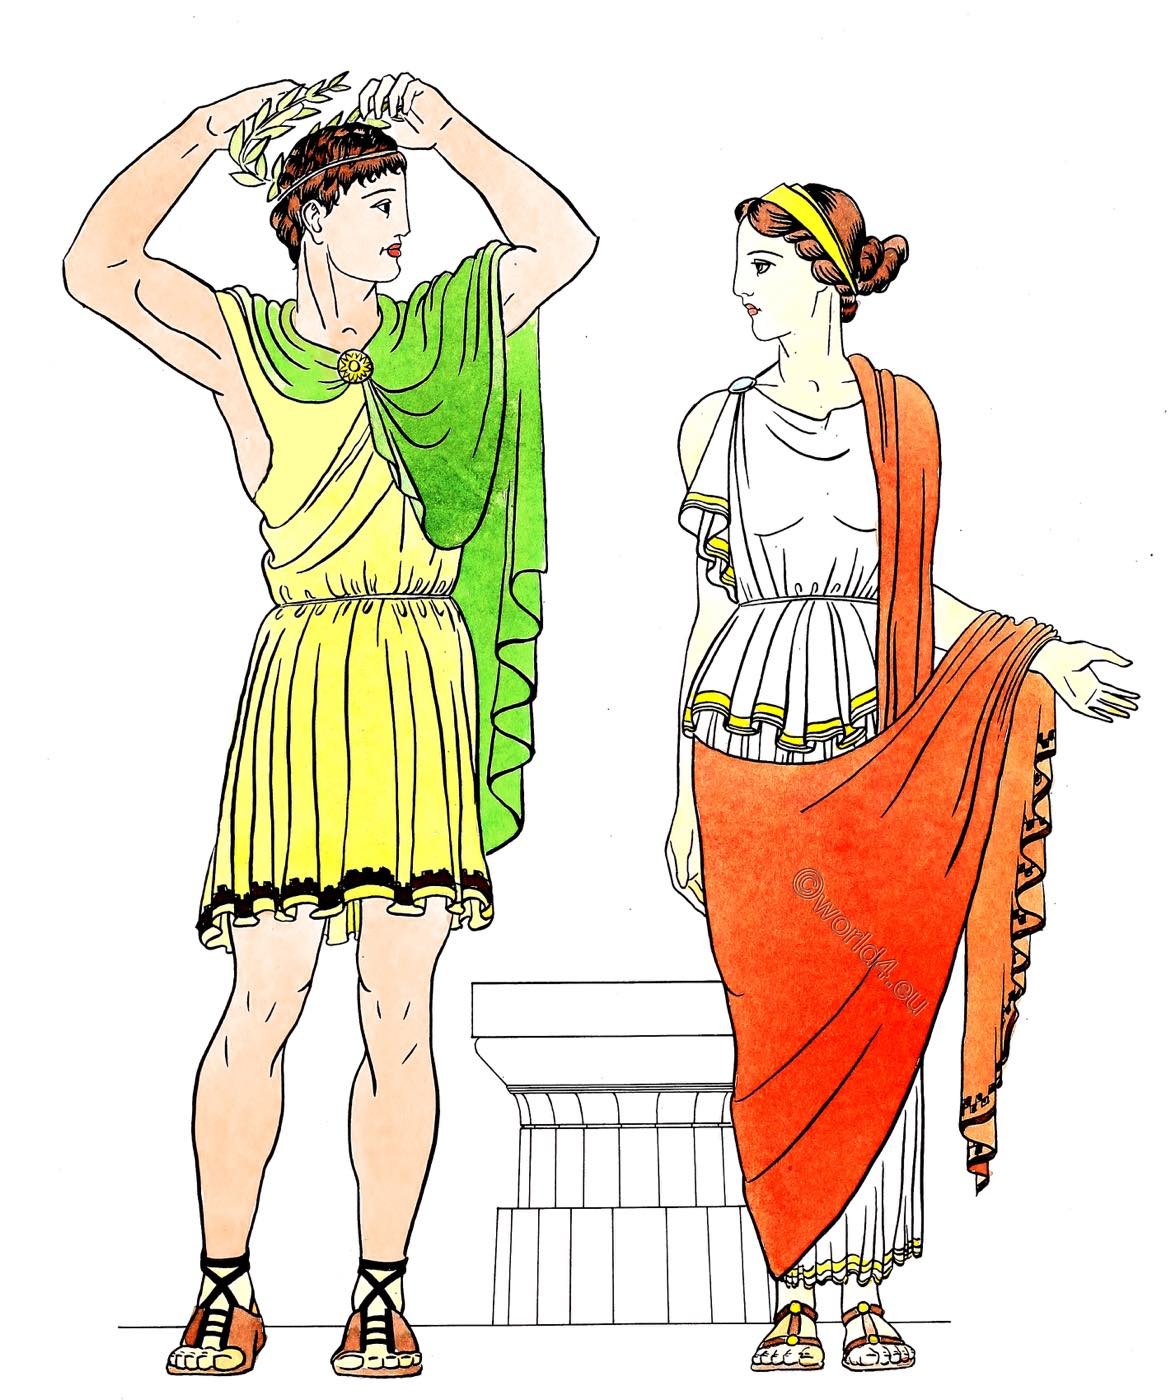 How Greek women dressed. The female dress of the classical period.